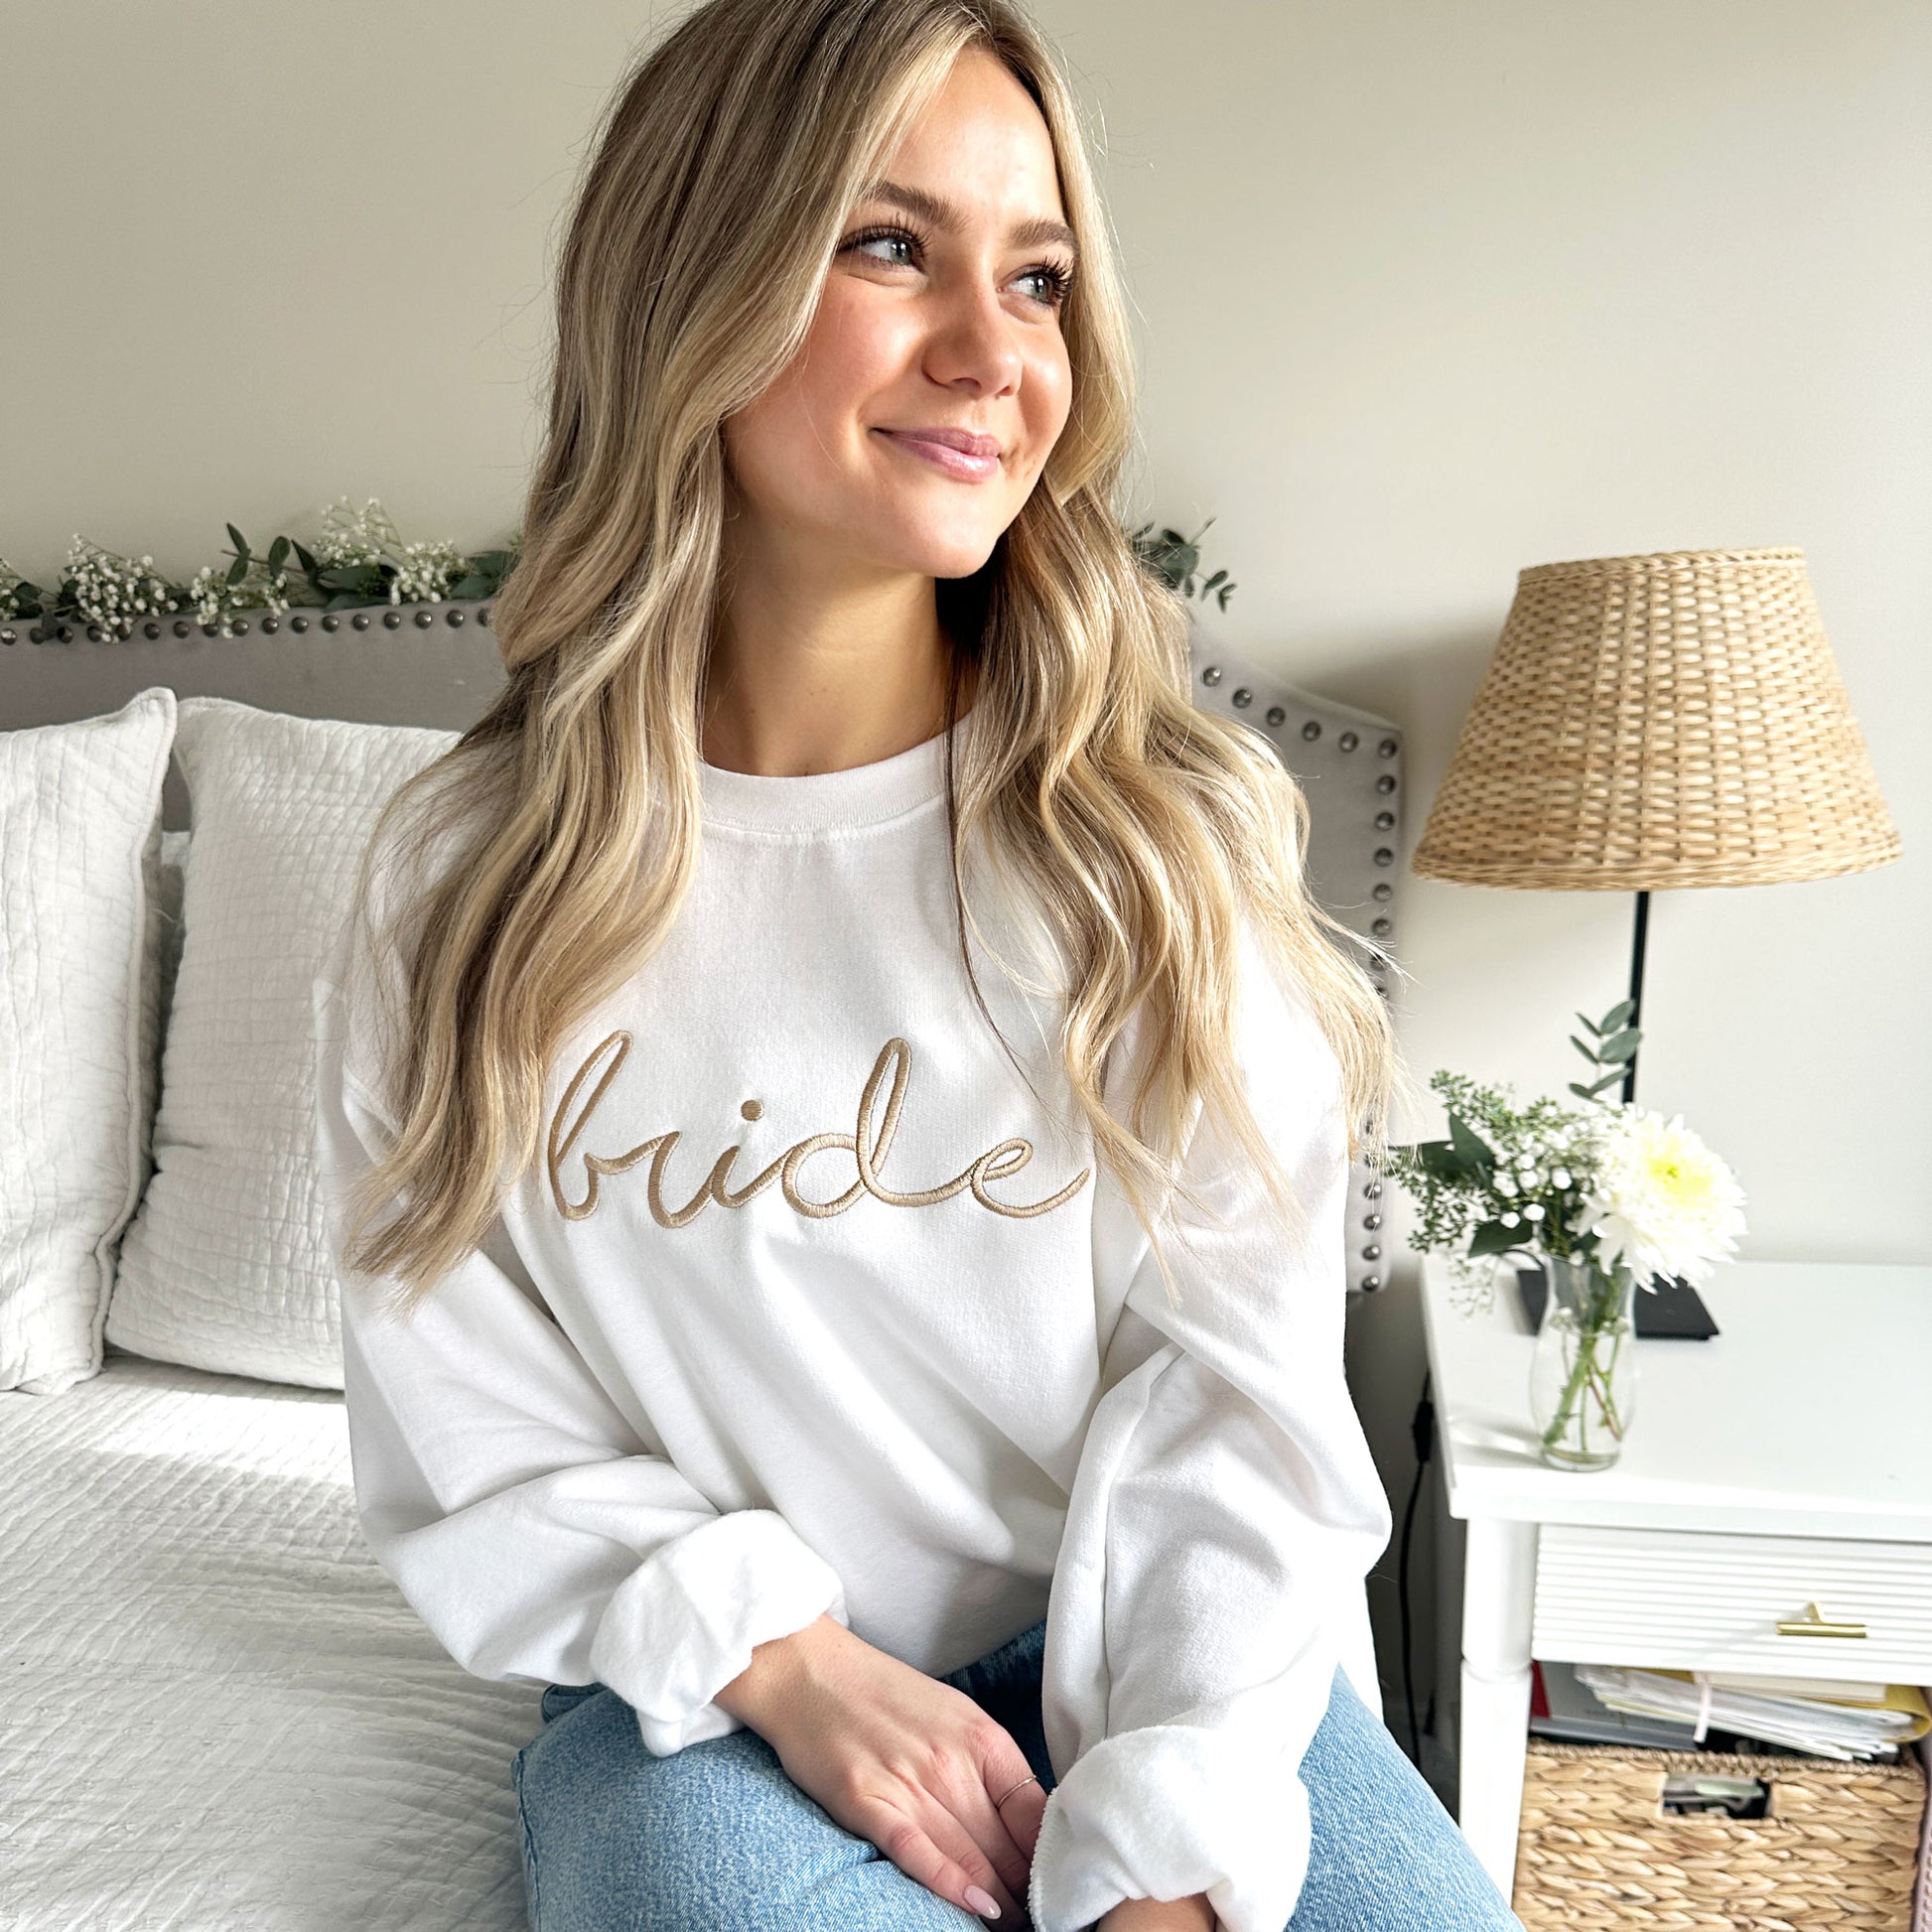 Young woman modeling a white crewneck sweatshirt with bride embroidered across the chest in camel thread